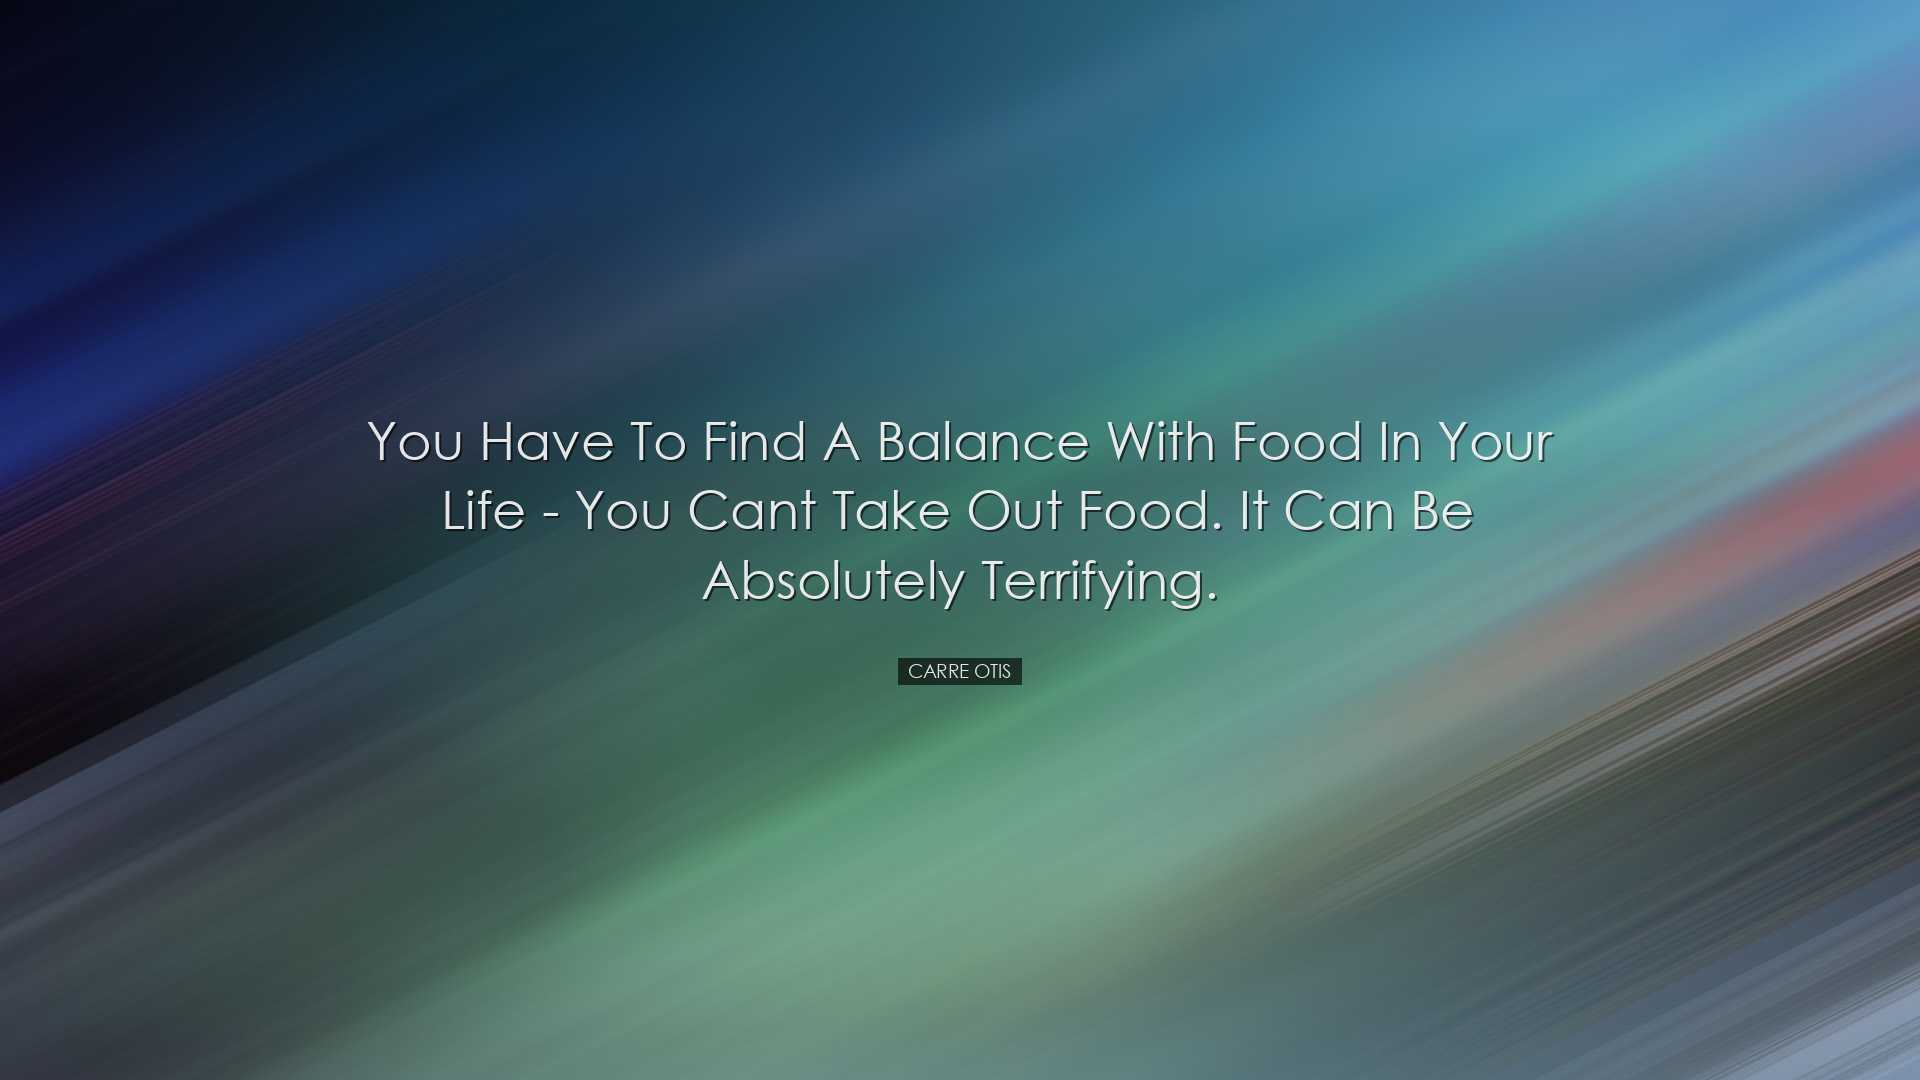 You have to find a balance with food in your life - you cant take